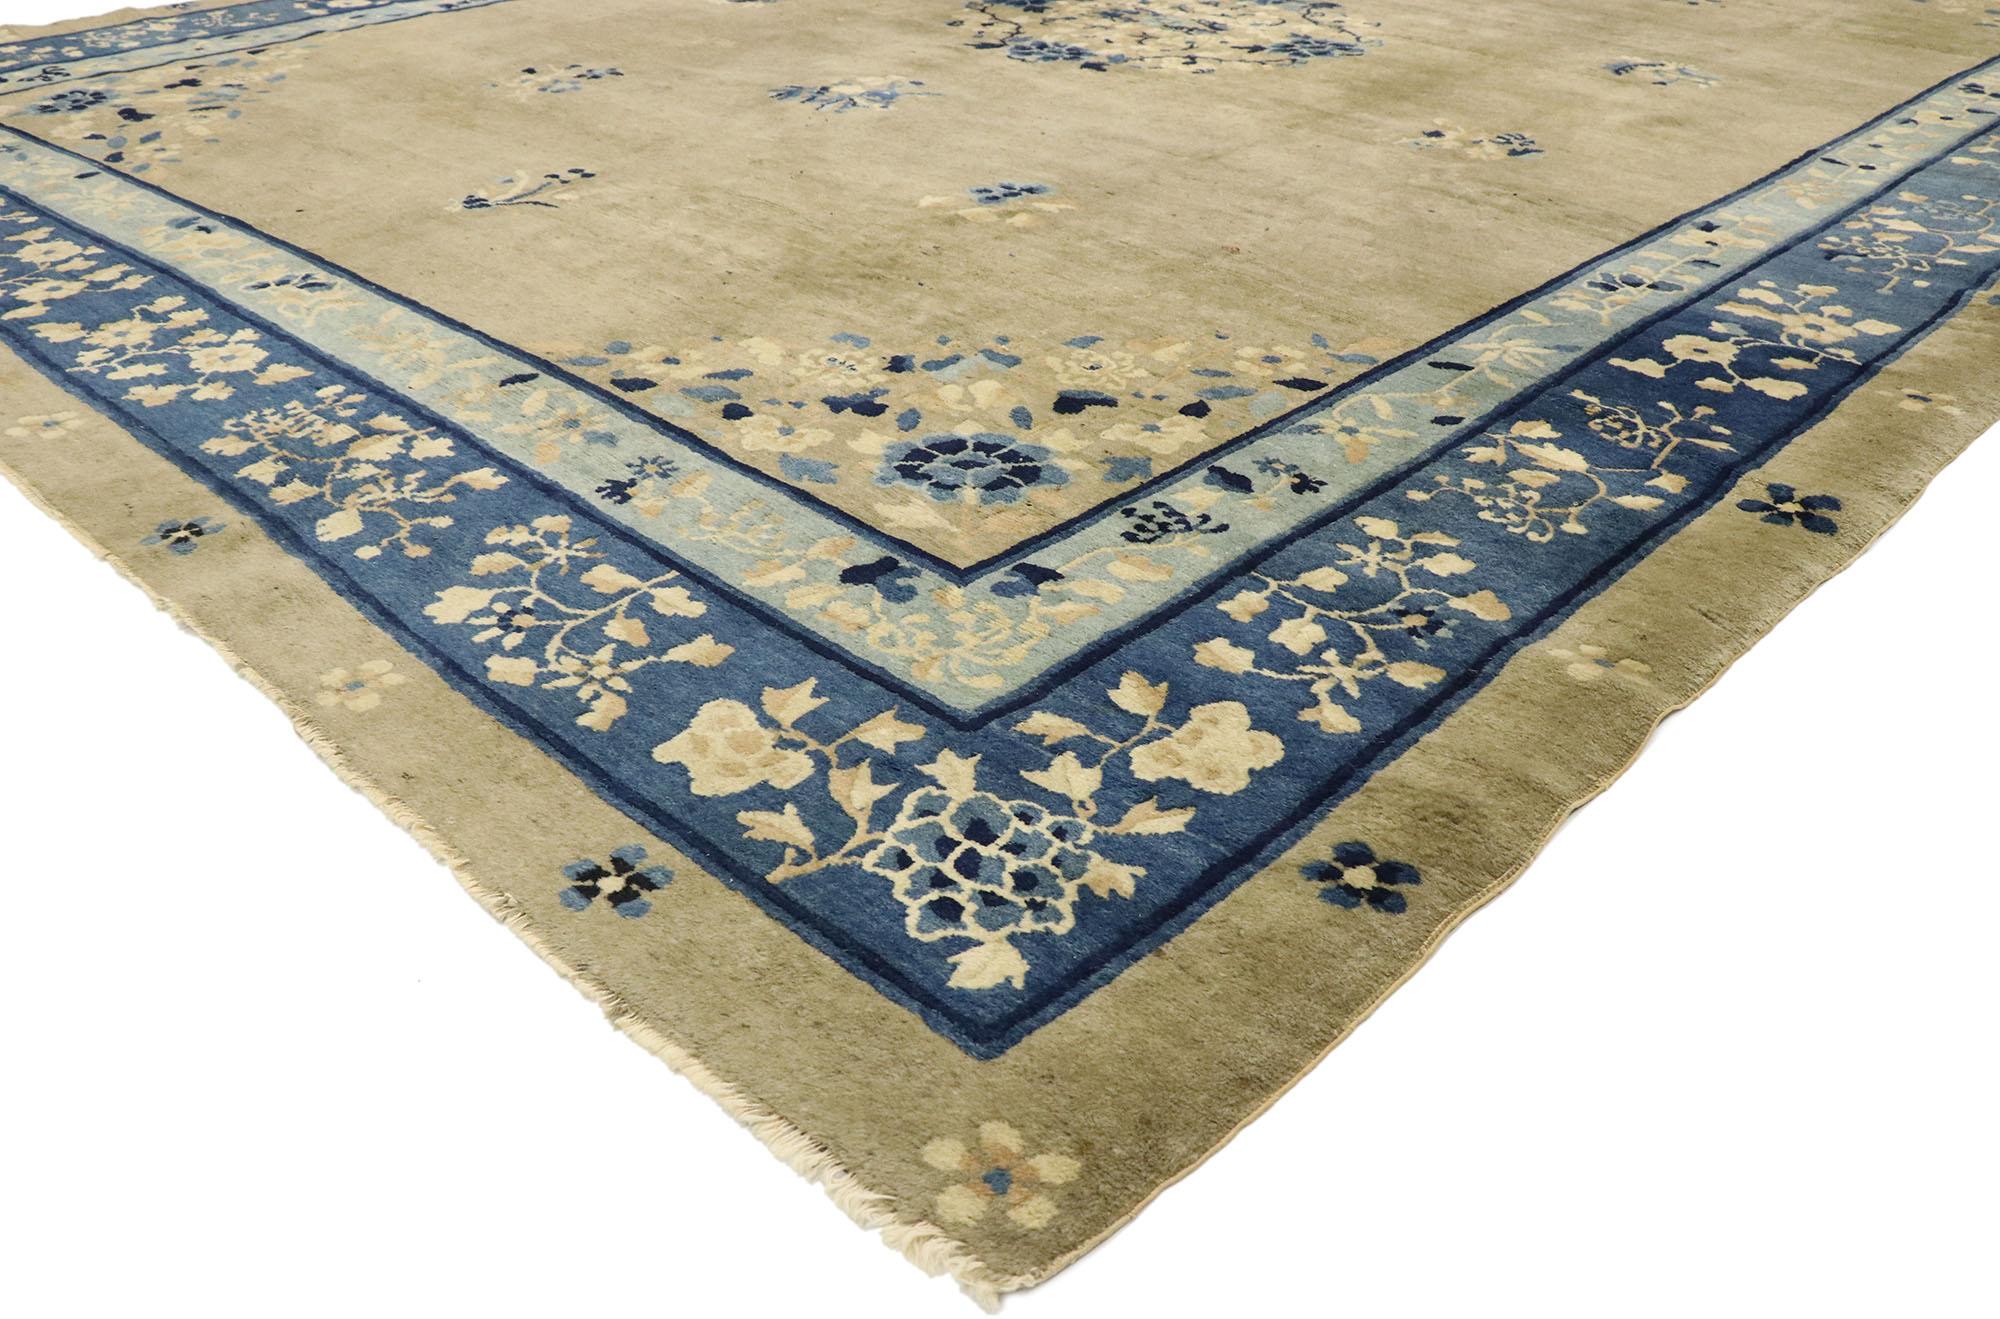 77510 distressed antique Chinese rug with romantic chinoiserie style. This hand knotted wool distressed antique Chinese Peking rug features a rounded open medallion decorated with a swirl of peonies and leafy tendrils floating in the center of an